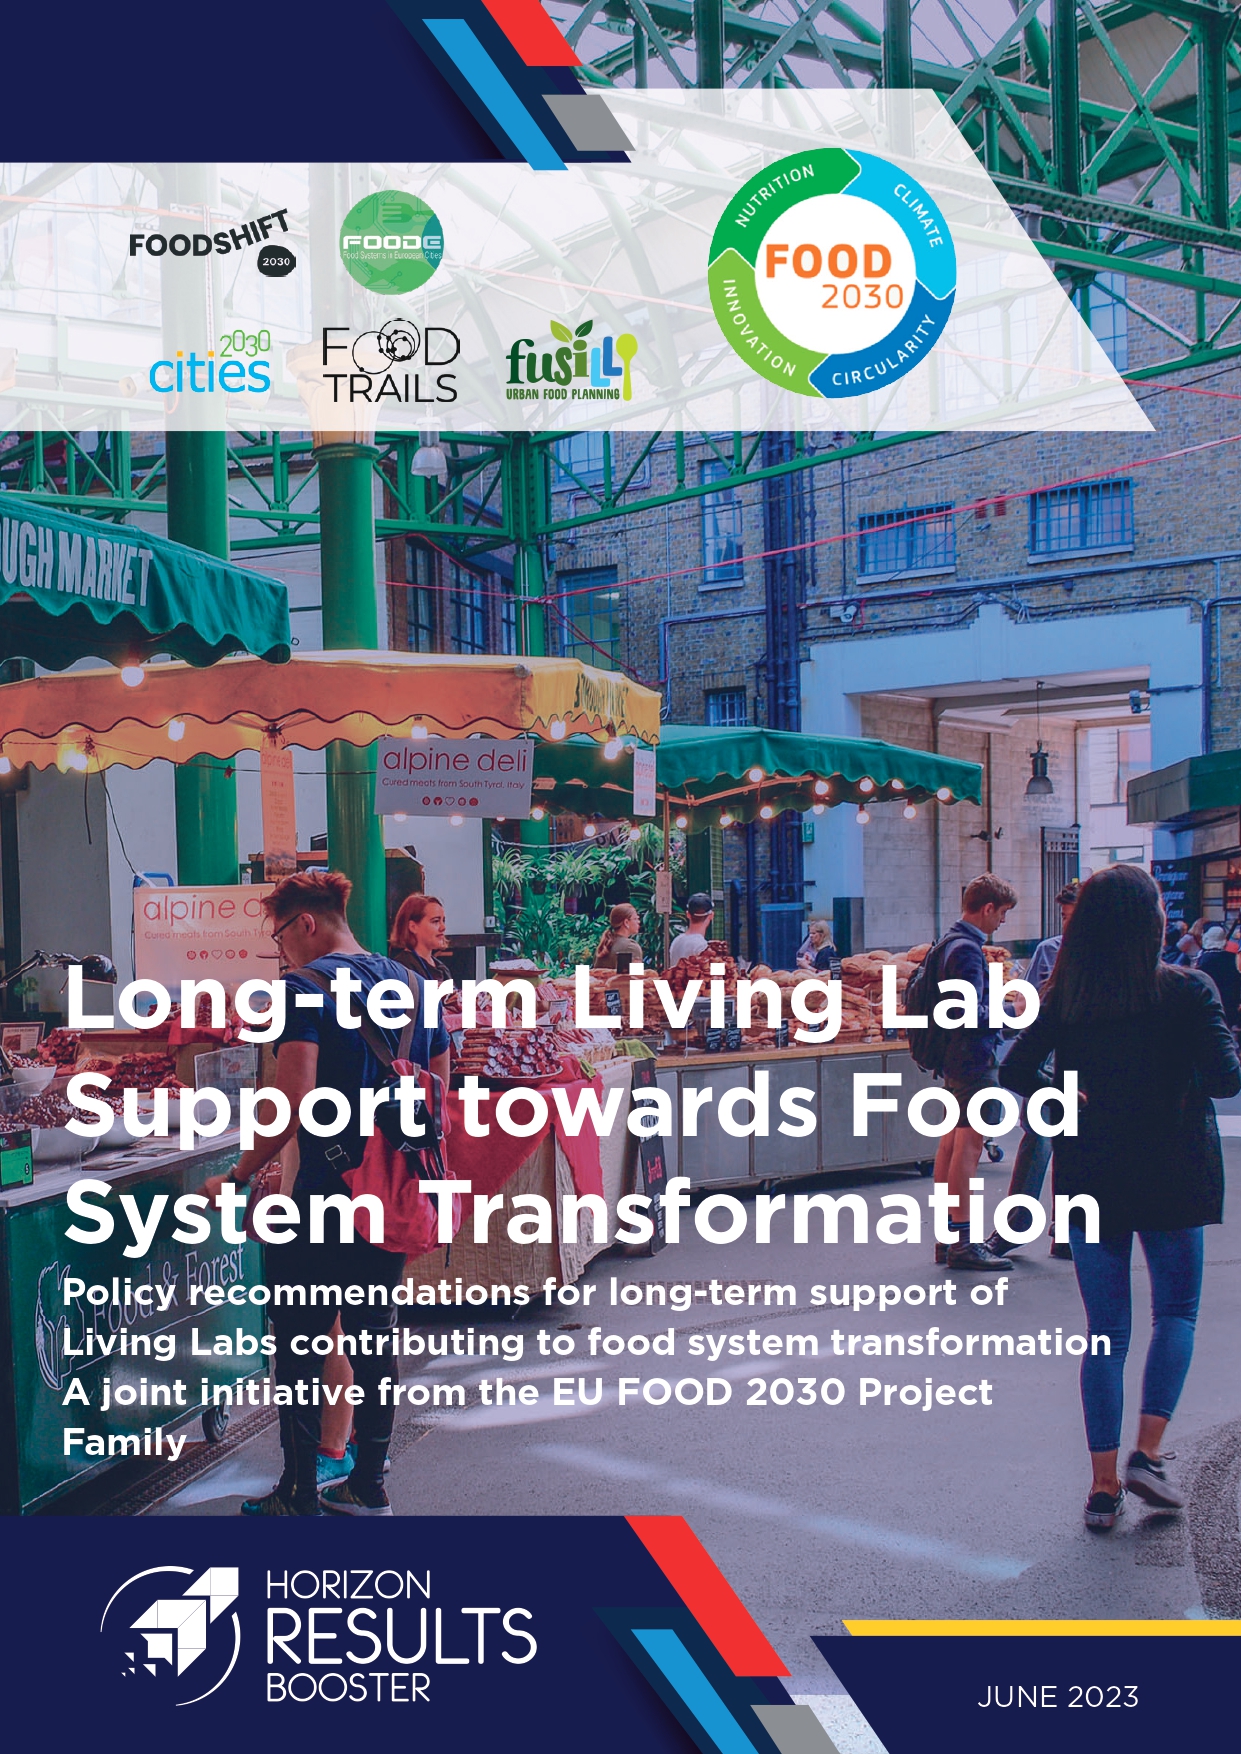 The EU FOOD 2030 Project Family’s Policy Brief “Long-term Living Lab Support towards Food System Transformation”